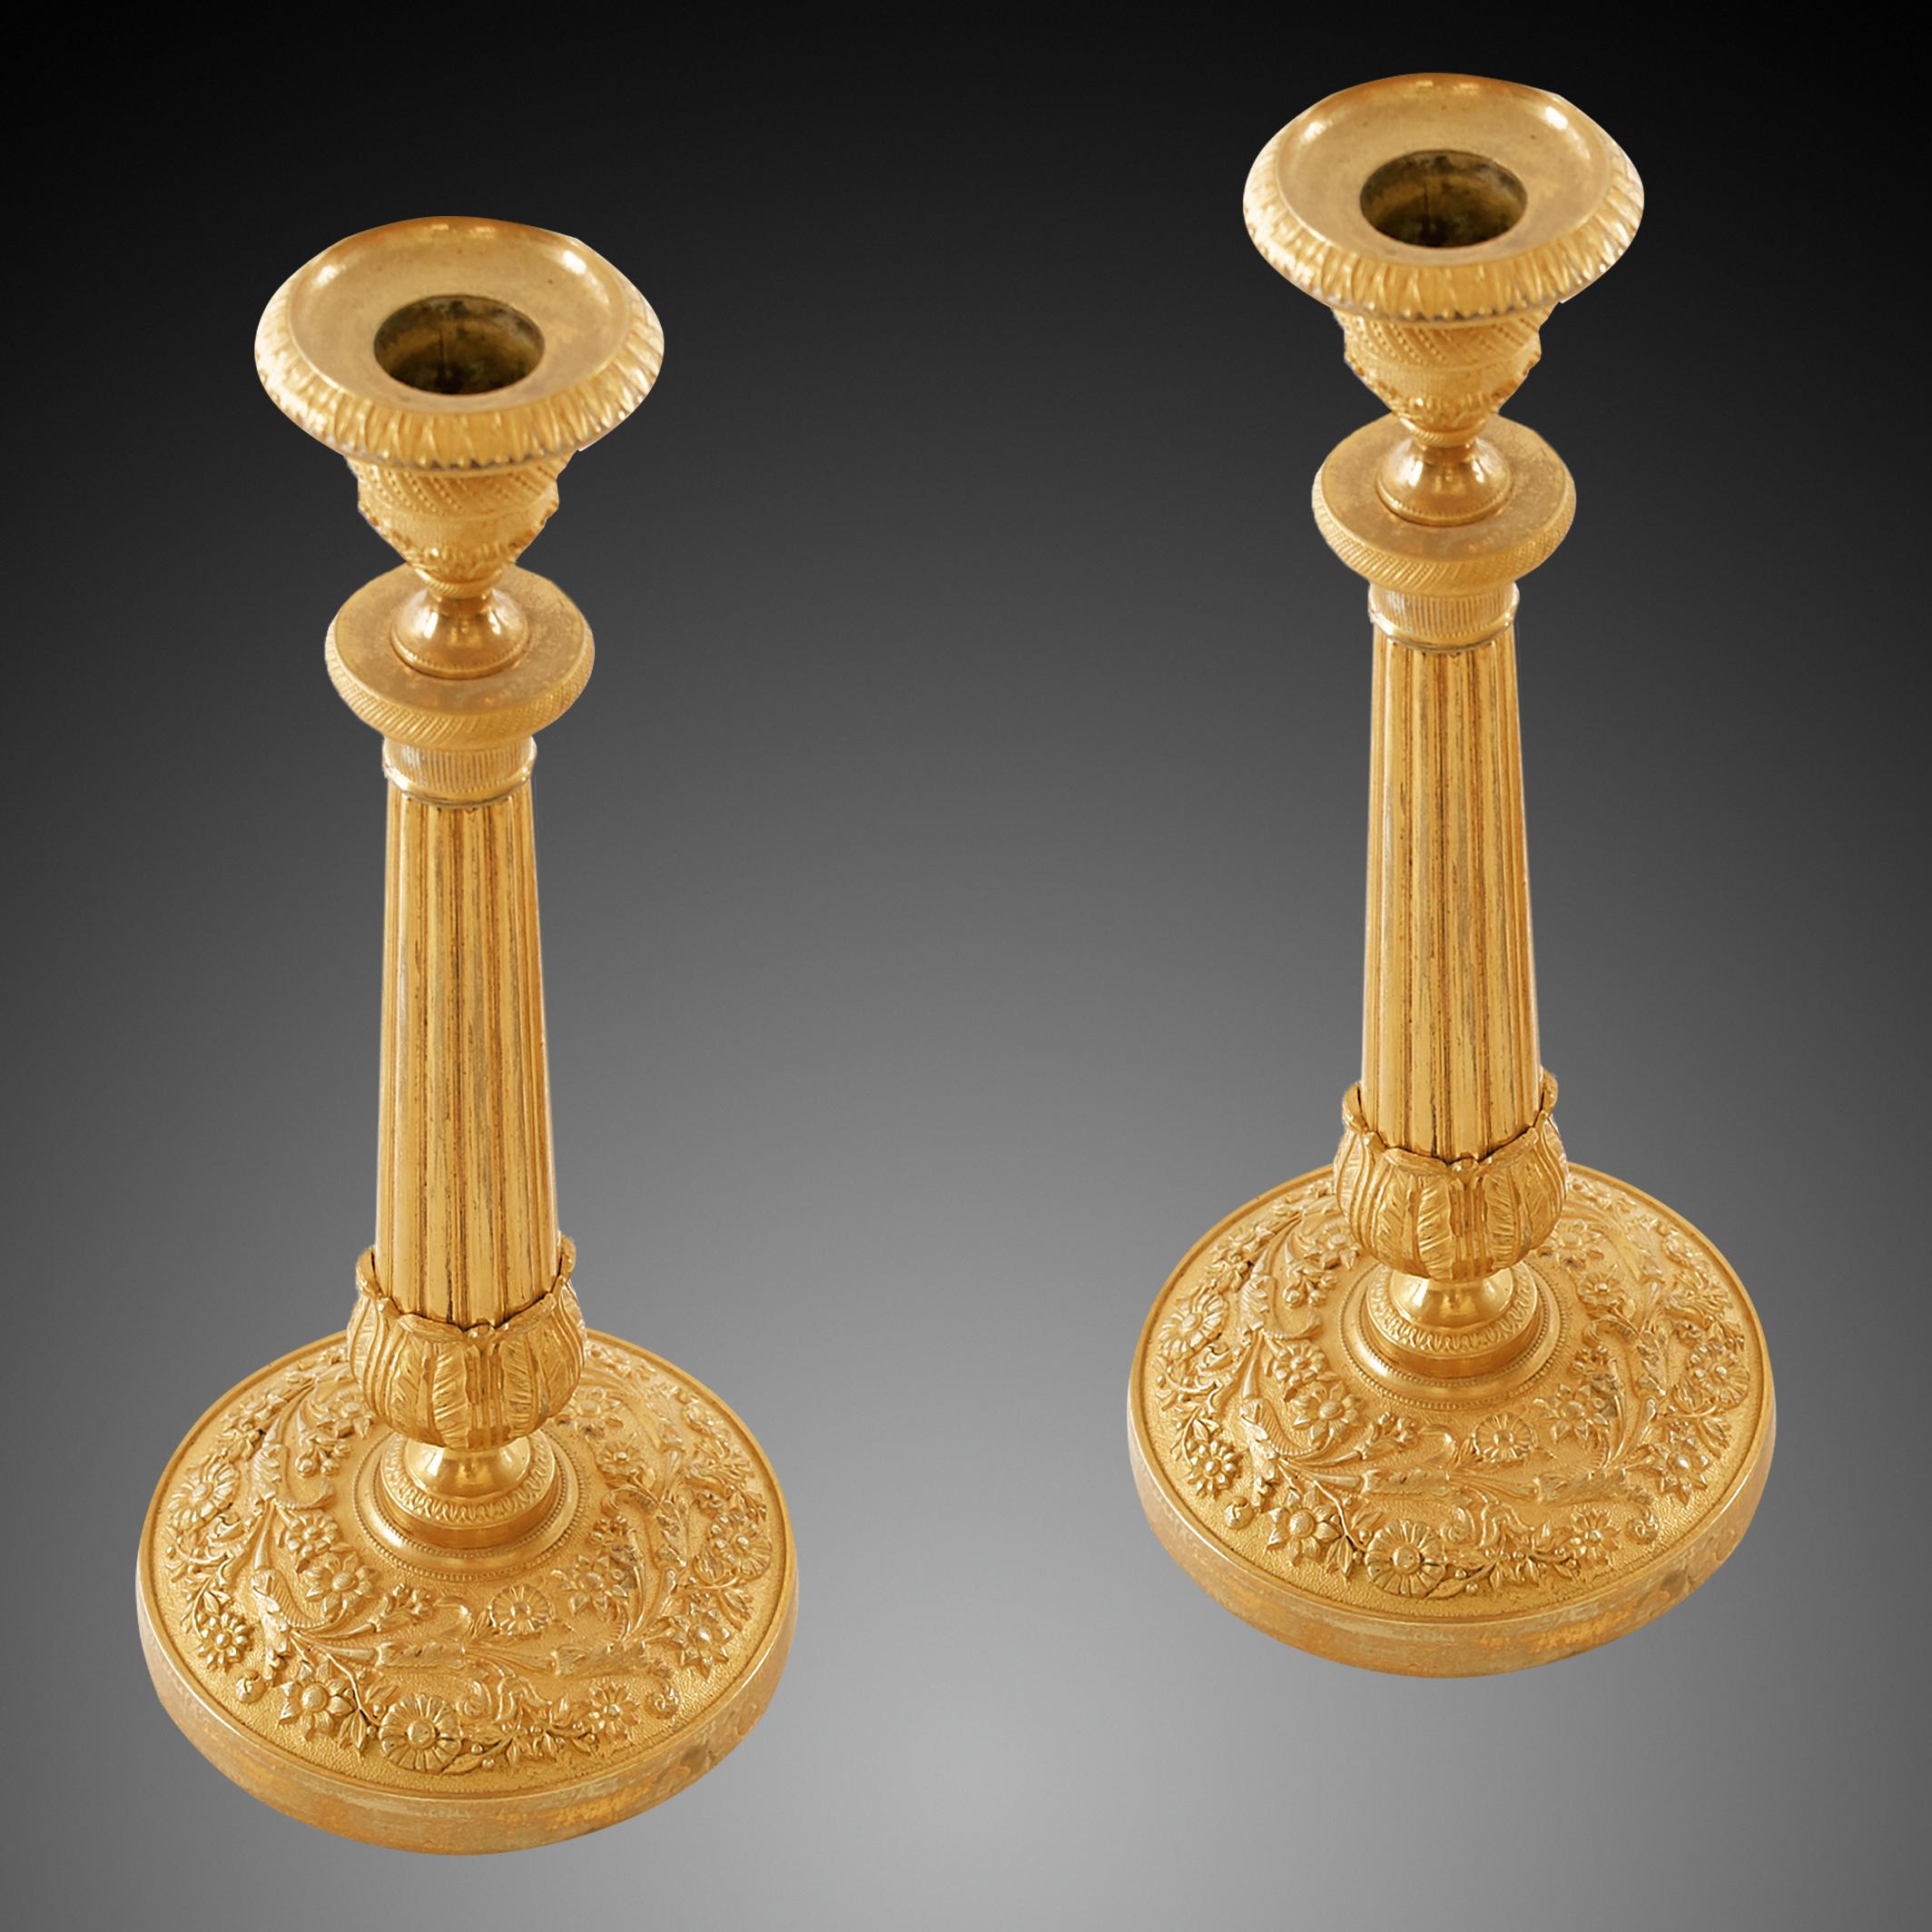 Restauration Rare Pair Of Gilt Bronze Empire French Candlesticks After Thomire For Sale